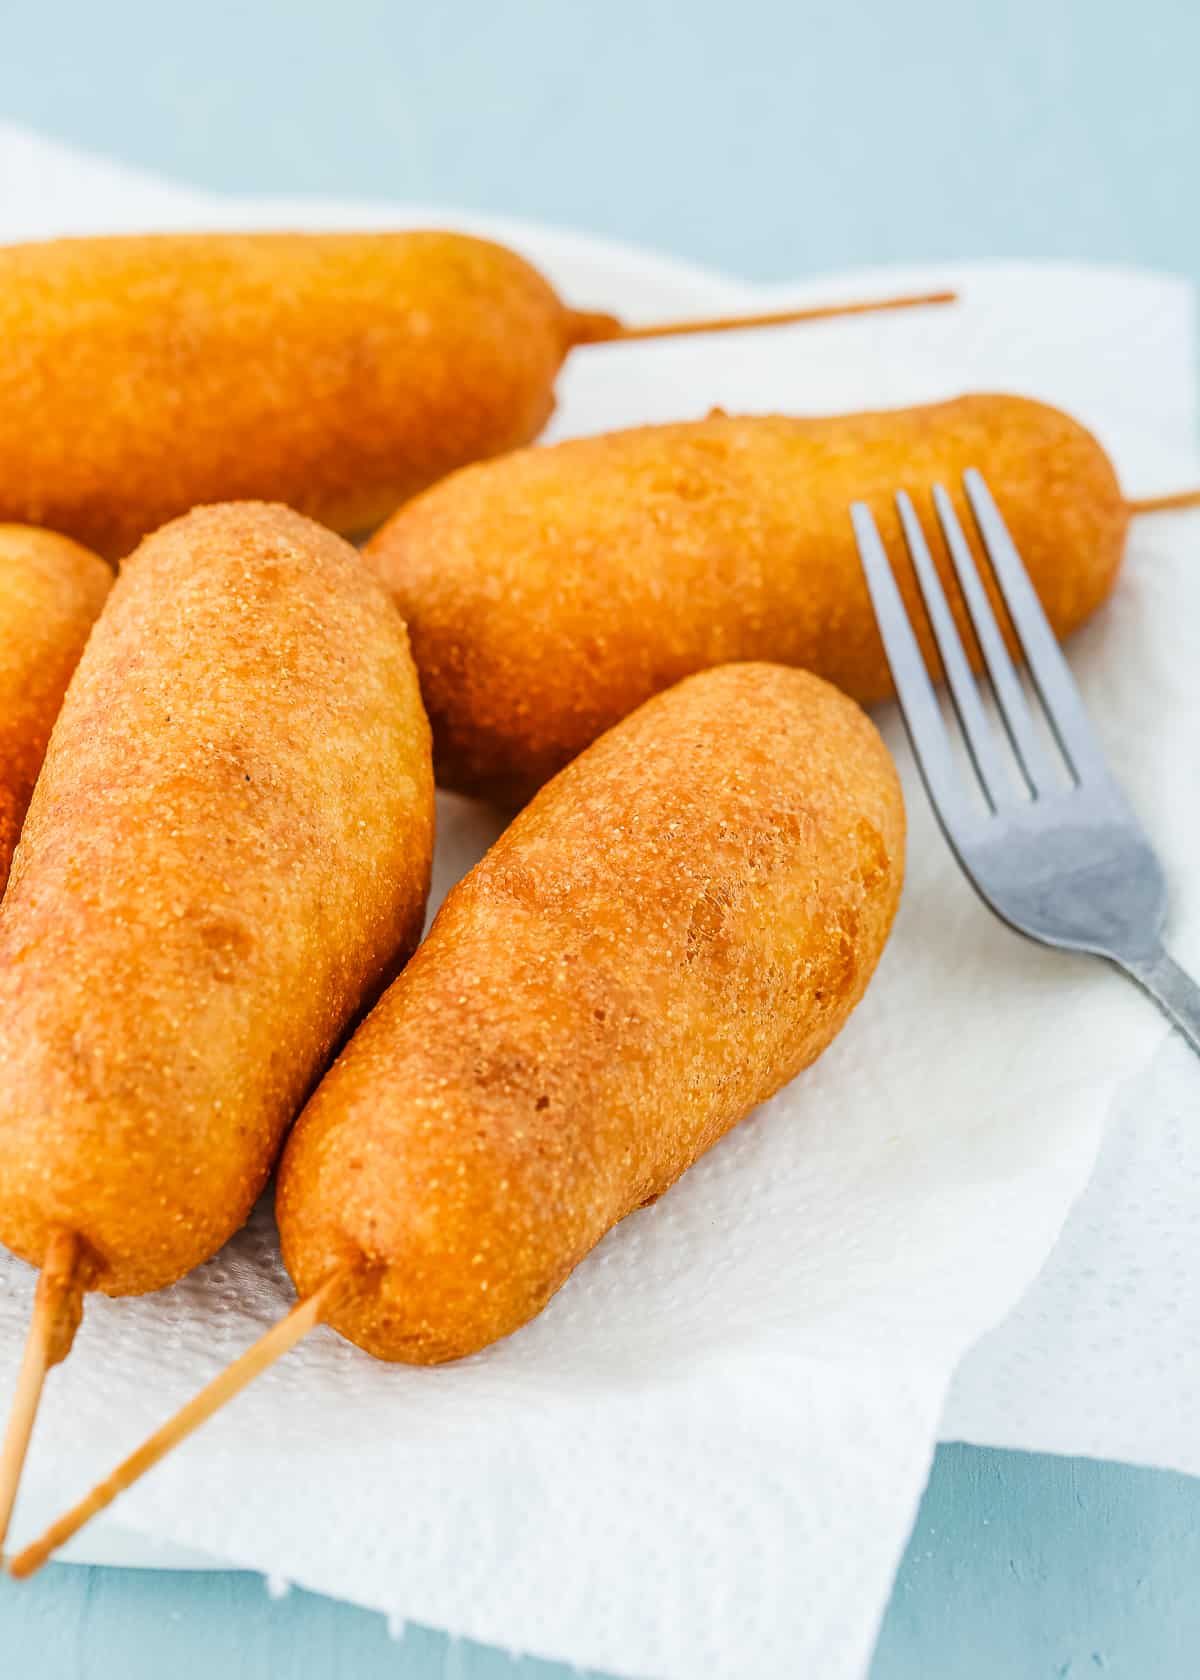 fried eggless corndogs on a plate with papel towel.